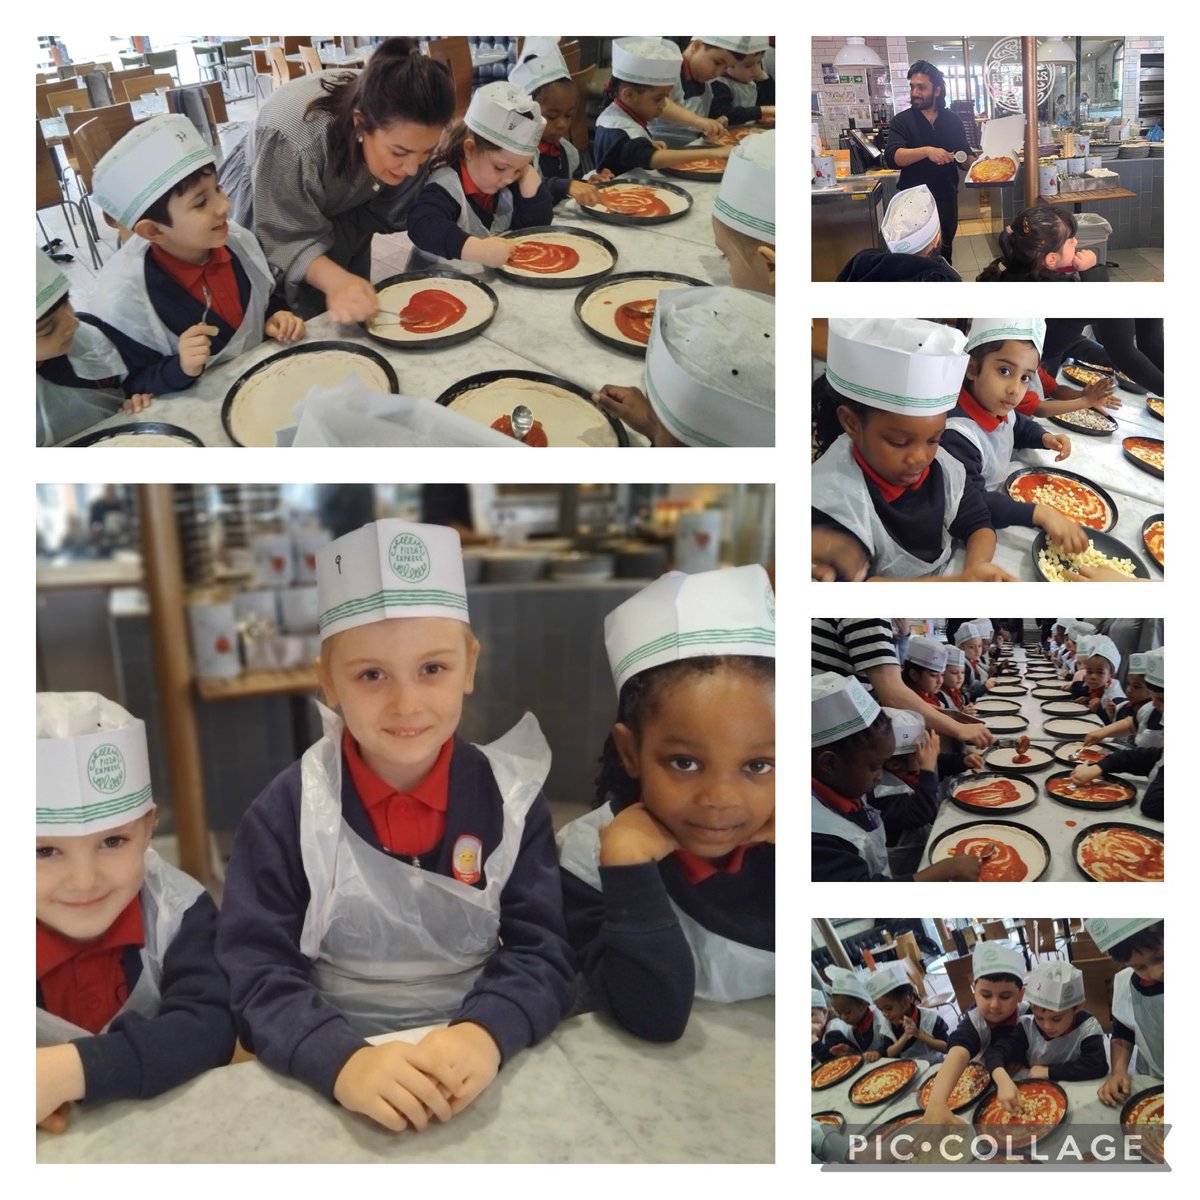 Thank you so much to @pizzaexpress in East Sheen for welcoming Acorn L and Acorn B to a pizza workshop. Thank you to your staff for being so welcoming and hospitable! I am sure the children will enjoy their pizzas for dinner tonight 🍕